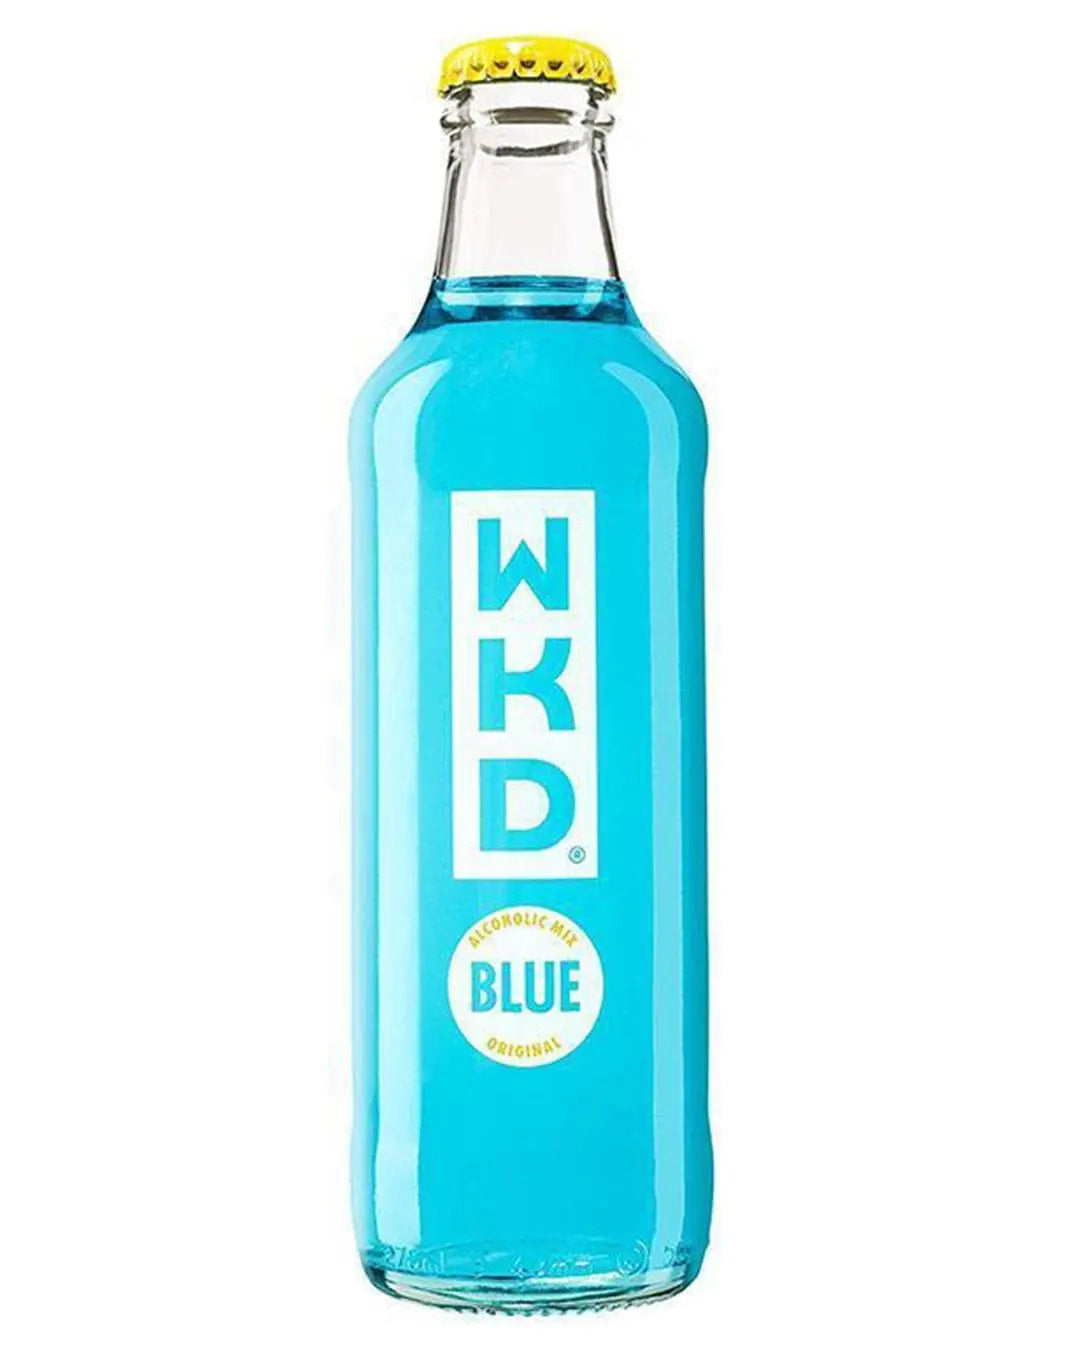 WKD Blue, 275 ml Ready Made Cocktails